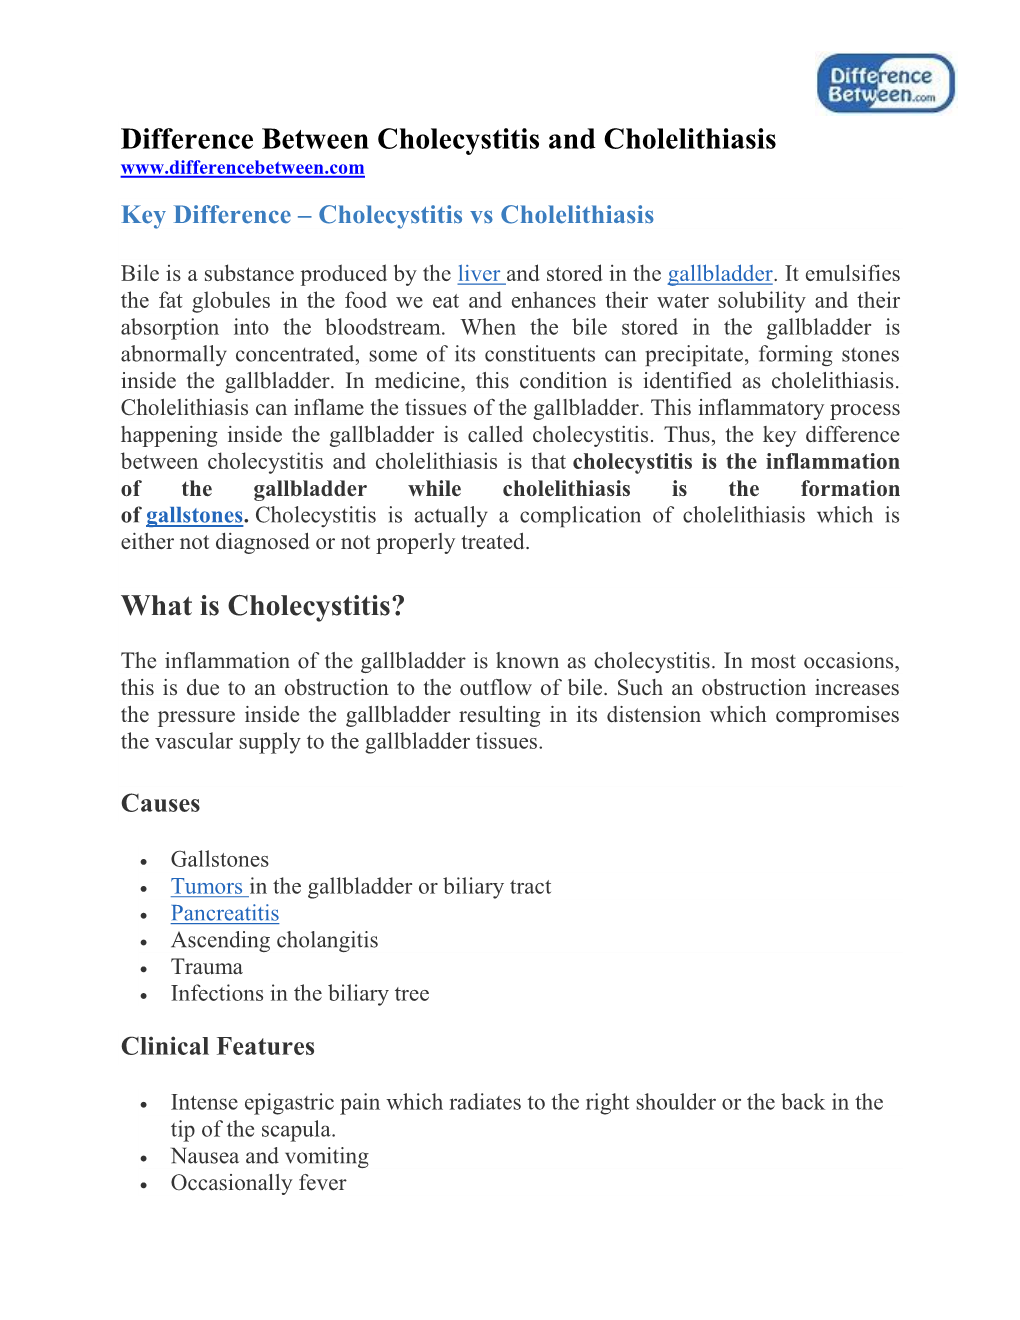 Difference Between Cholecystitis and Cholelithiasis Key Difference – Cholecystitis Vs Cholelithiasis